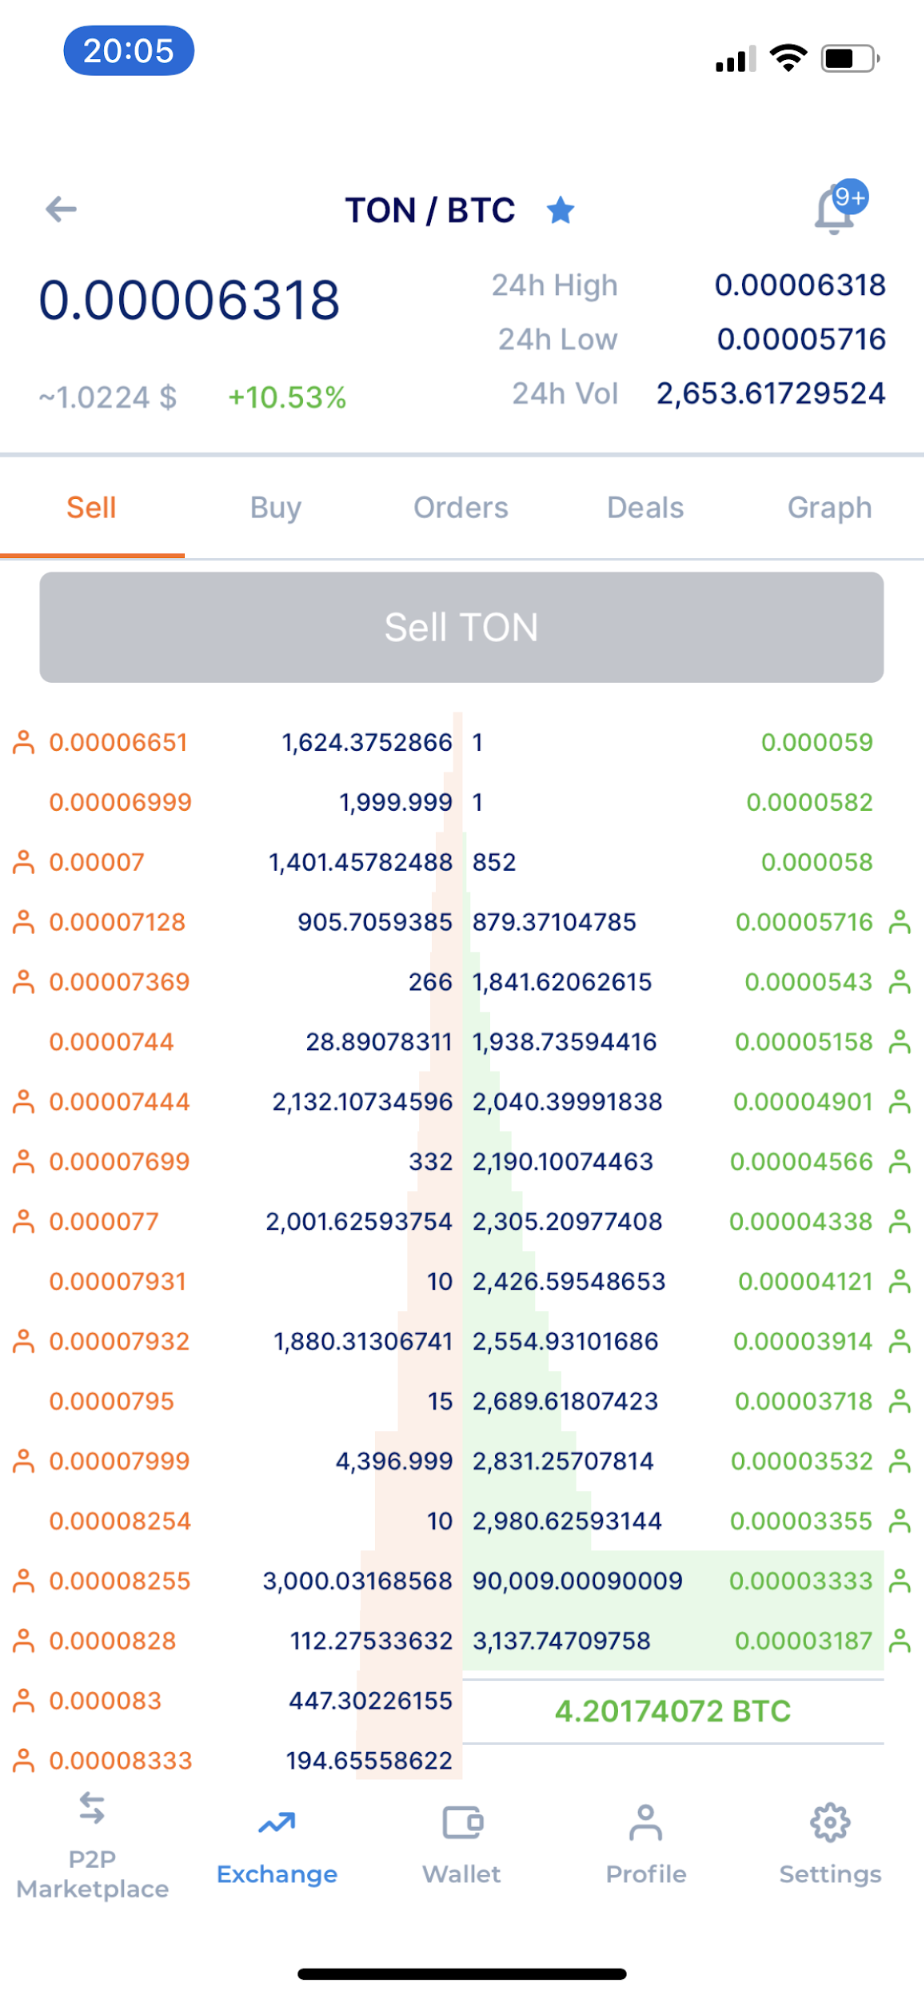 Where to Buy and Sell TON Crystal: Coins of Legendary Free TON Blockage Project are Available for Trade at SIGEN.pro